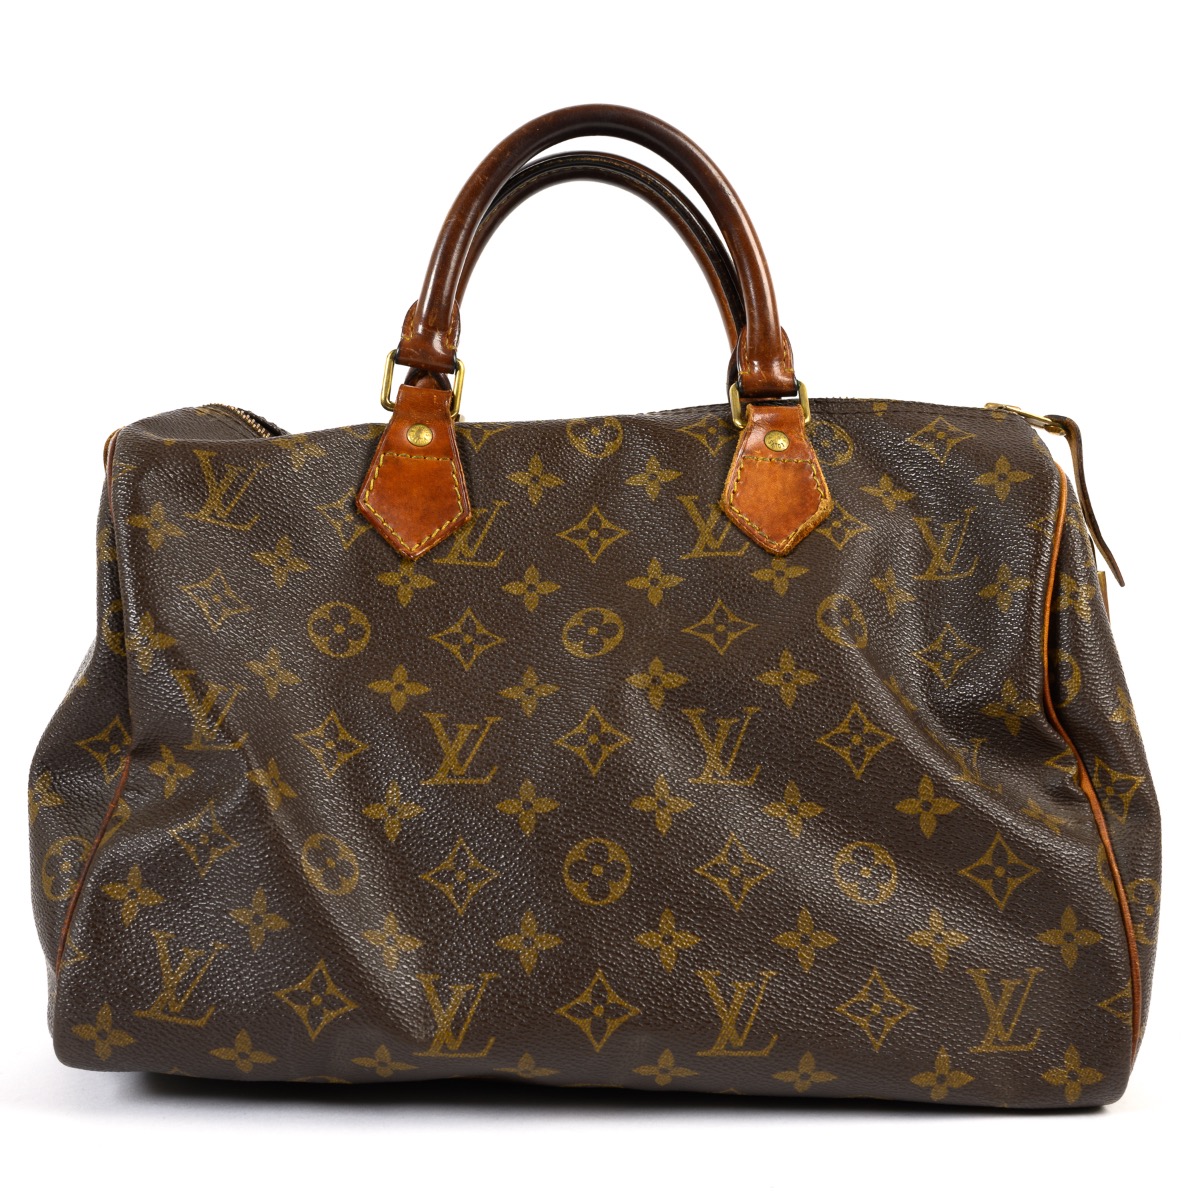 A Guide to Authenticating the Louis Vuitton Monogram Speedy Sizes 30-40  (Authenticating Louis Vuitton) - Kindle edition by Republic, Resale, Weis,  Molly. Arts & Photography Kindle eBooks @ .